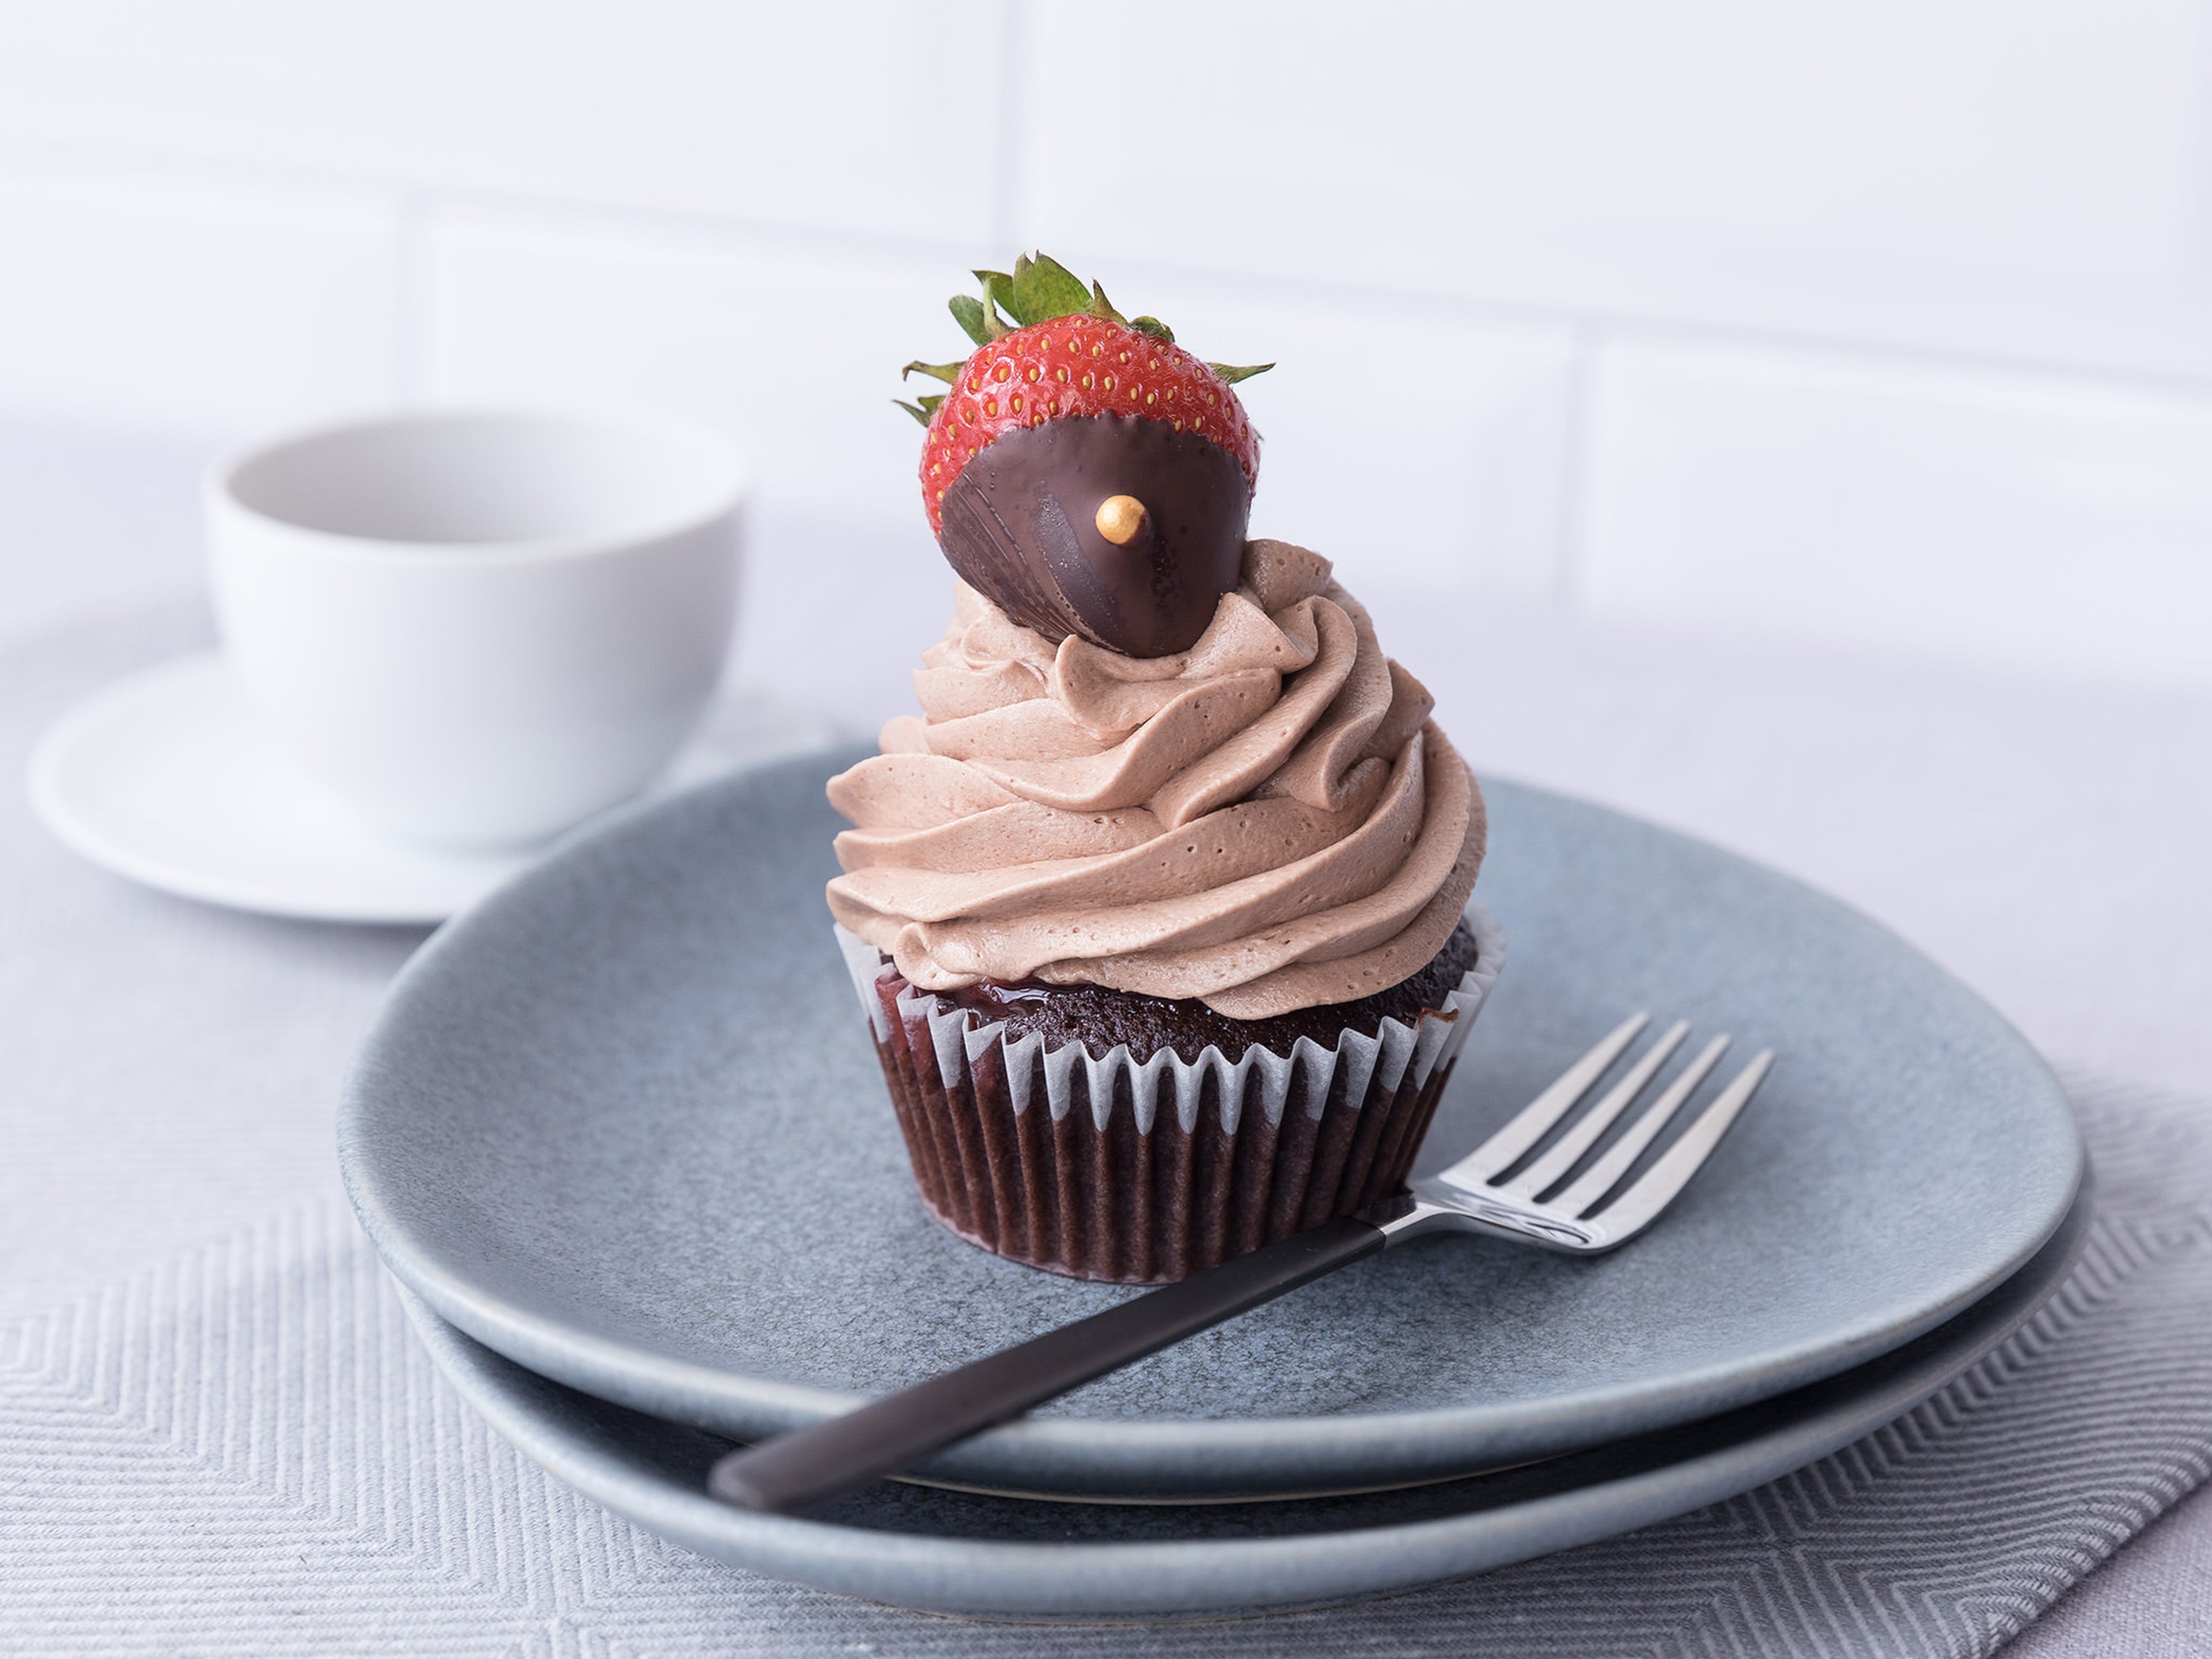 Strawberry-filled cupcakes with chocolate-covered strawberries